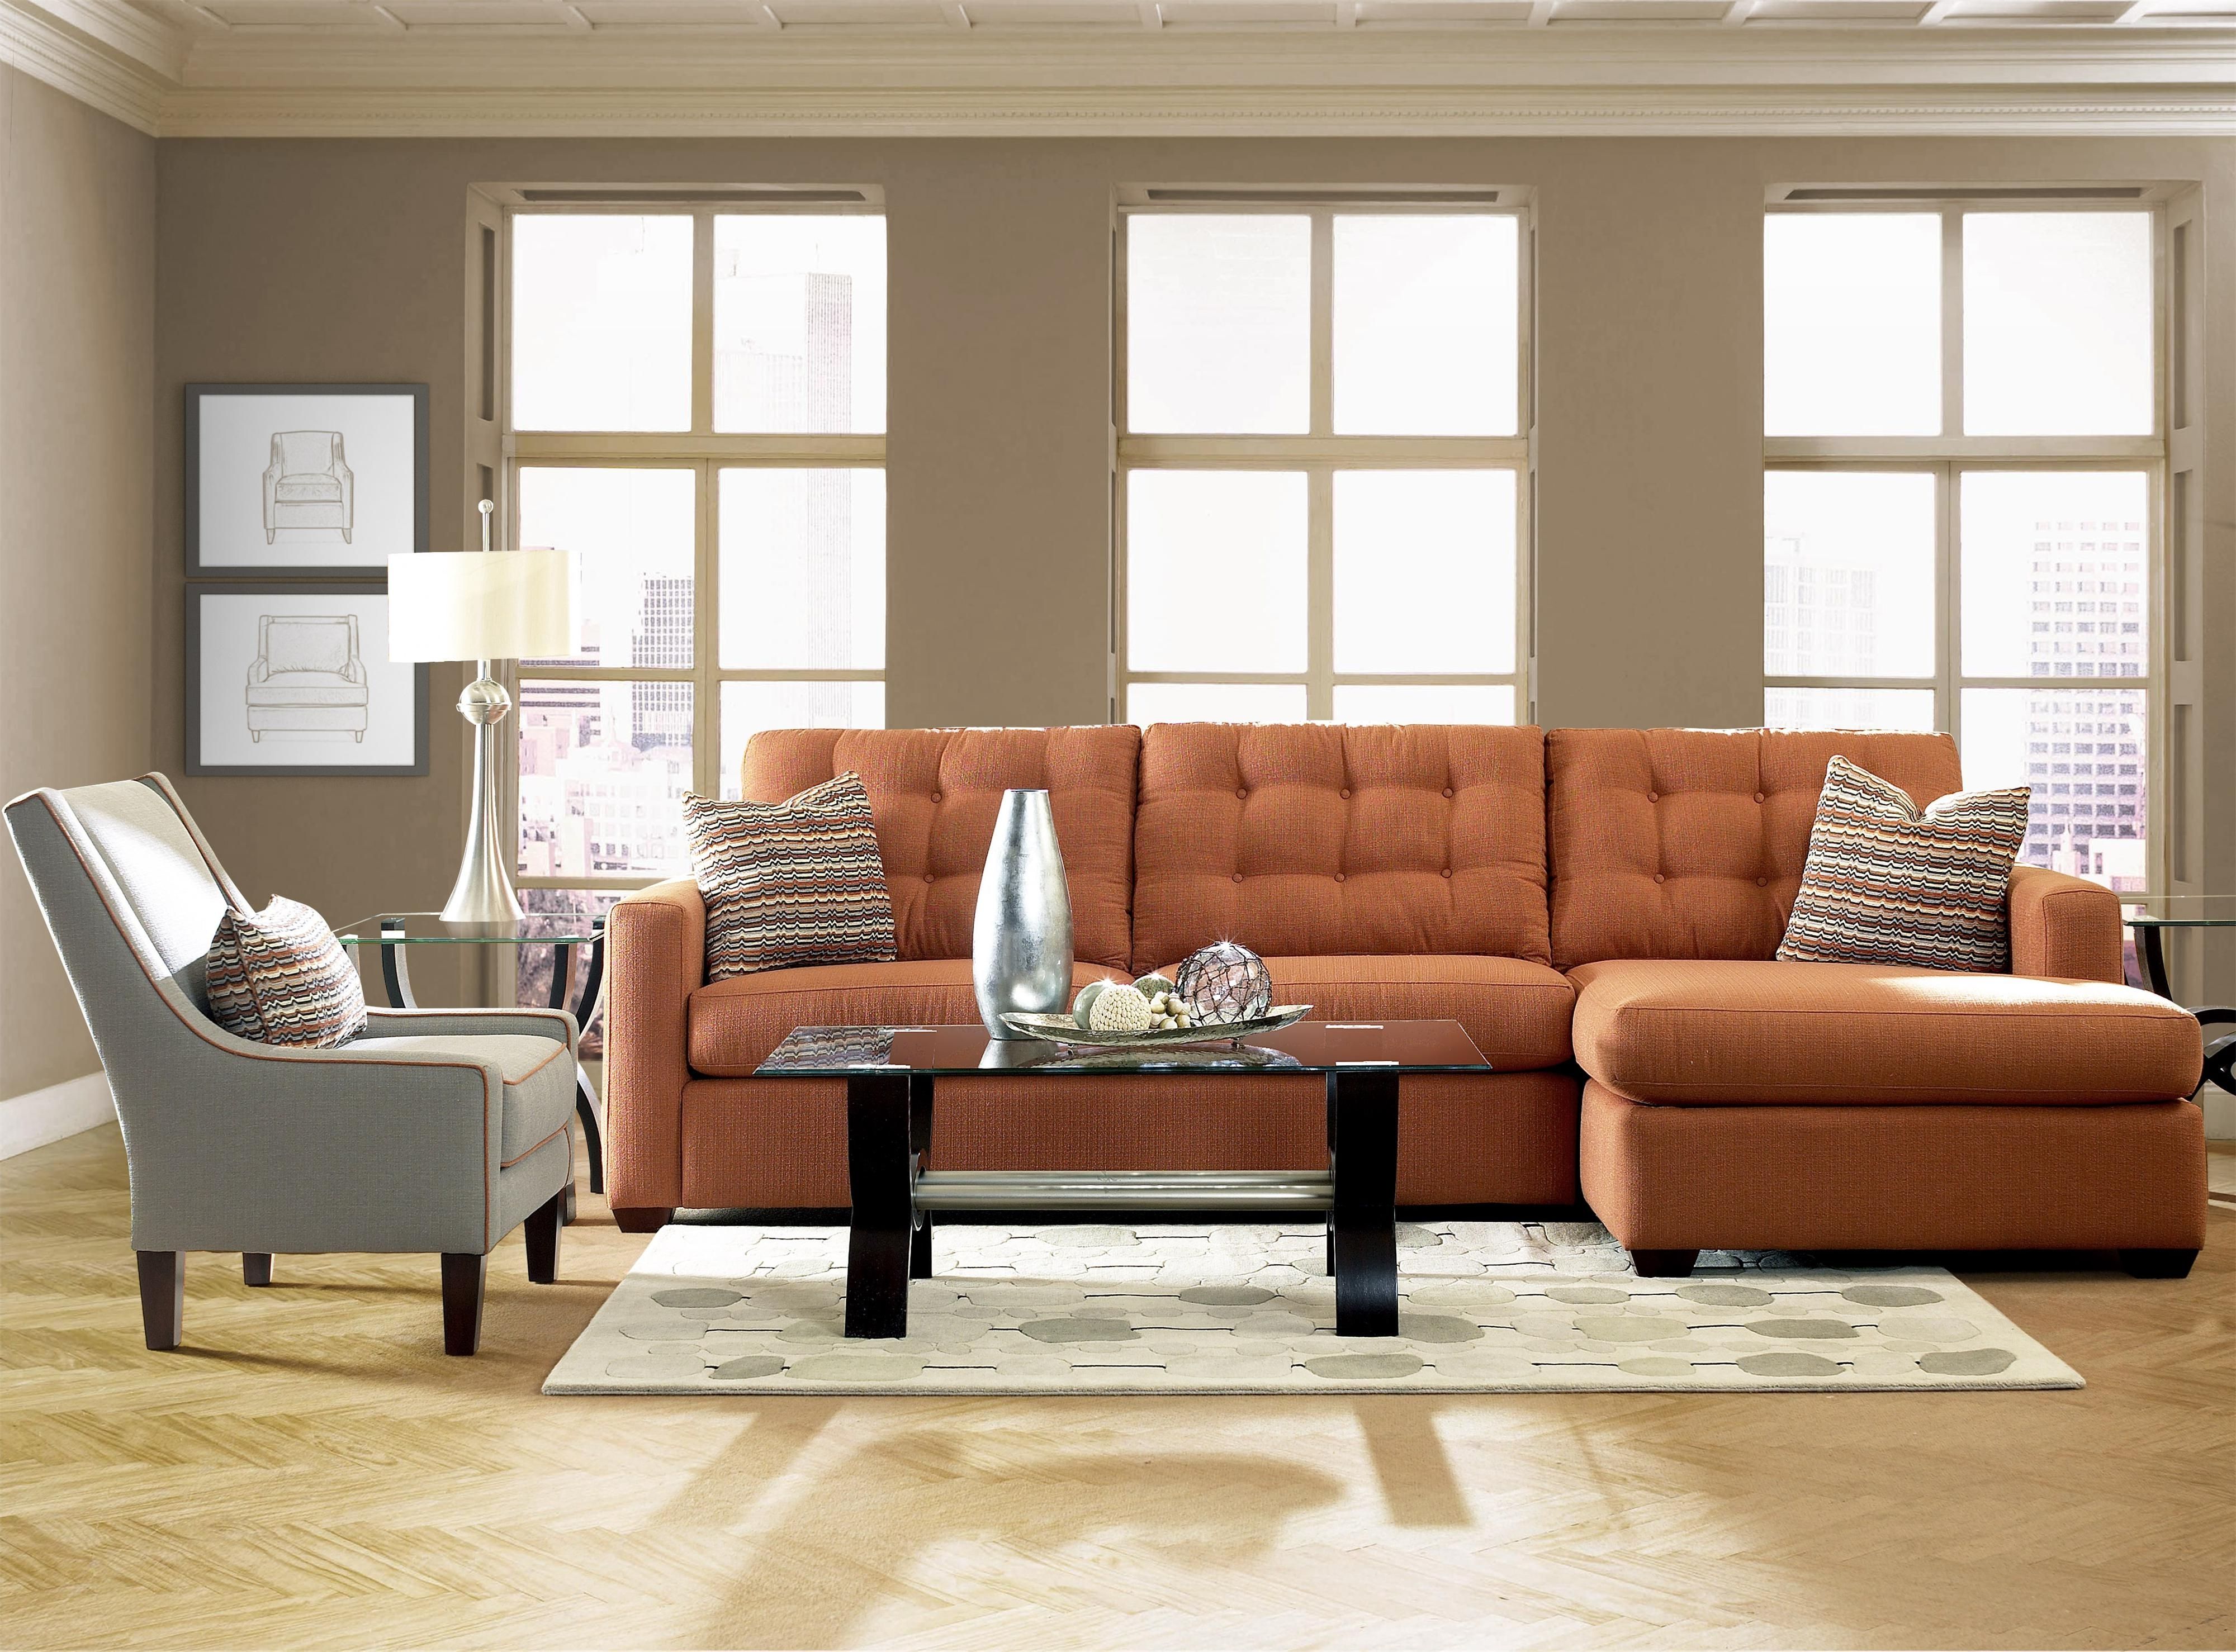 living room ideas with chaise lounge